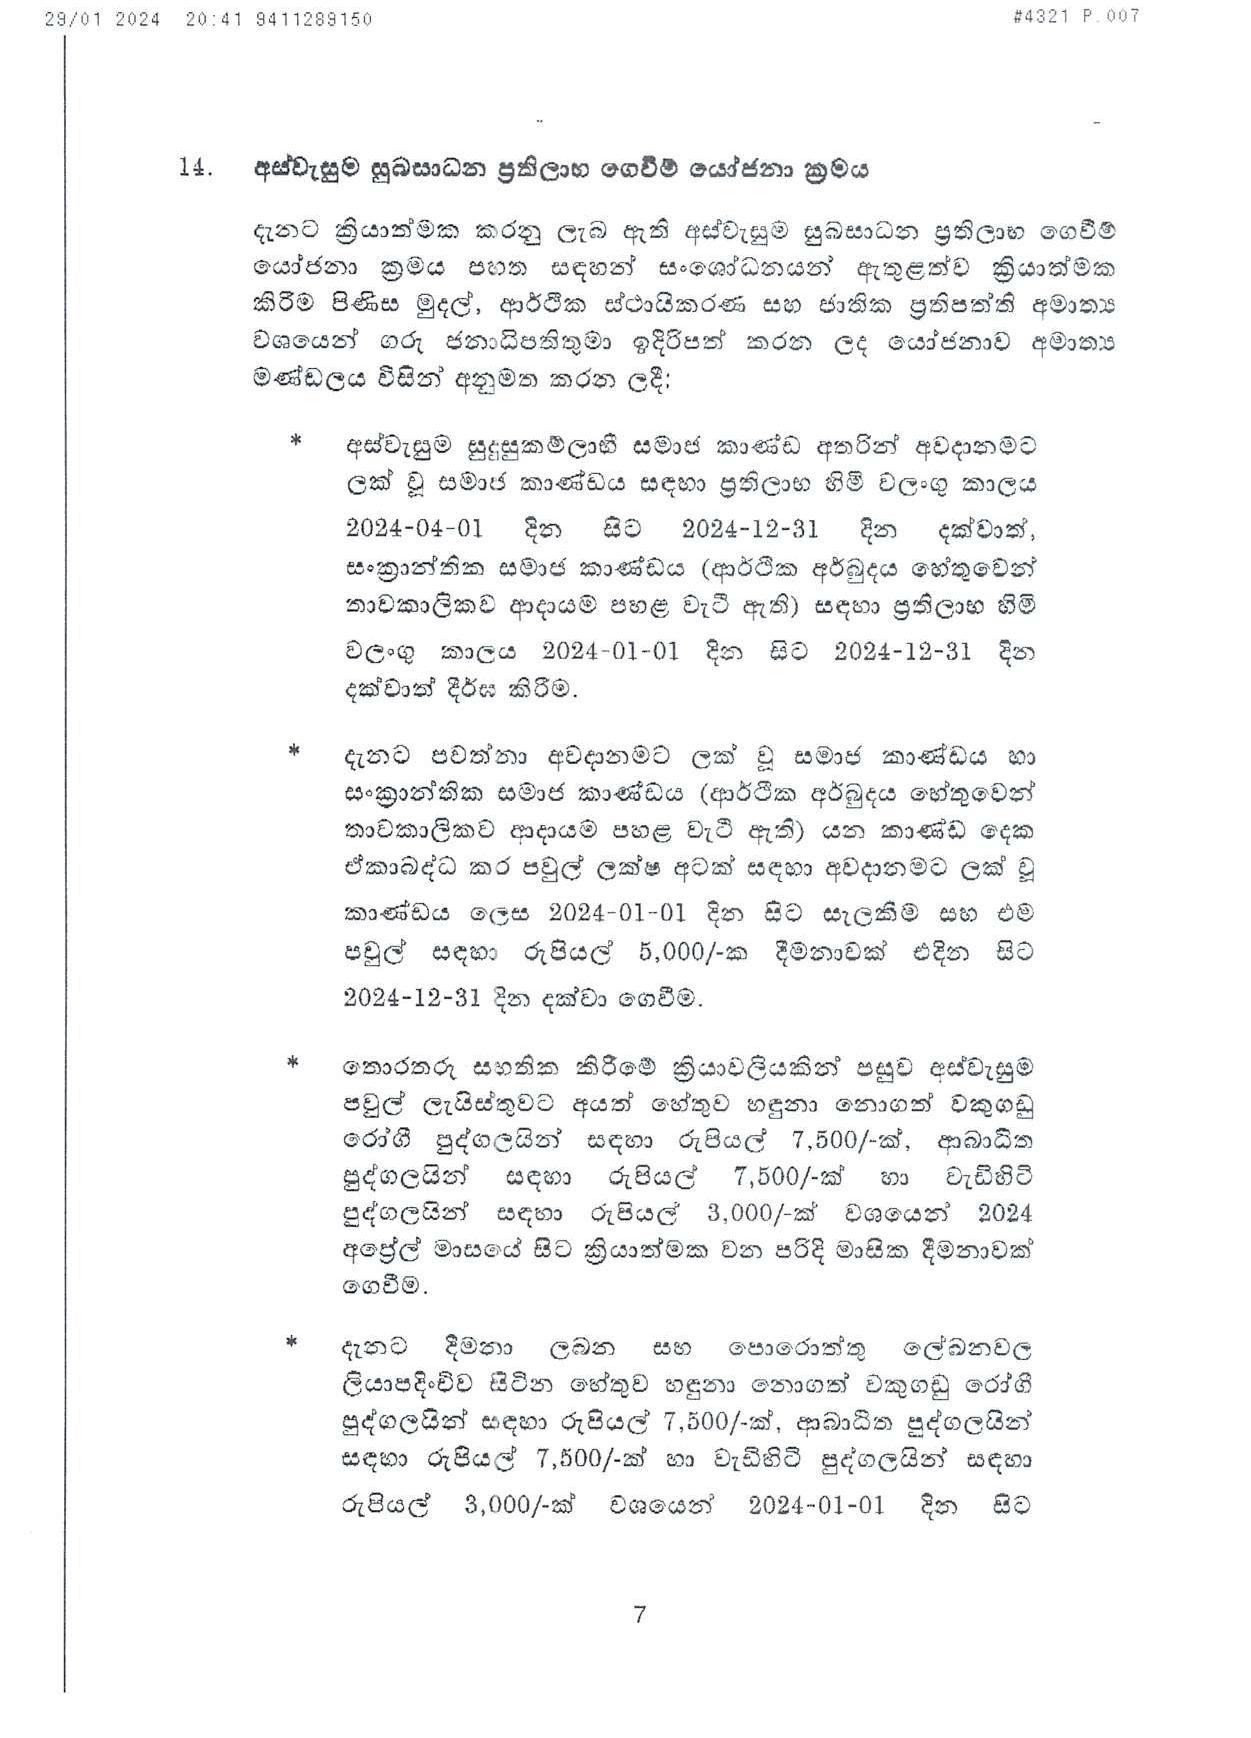 Cabinet Decisions on 29.01.2024 compressed page 007